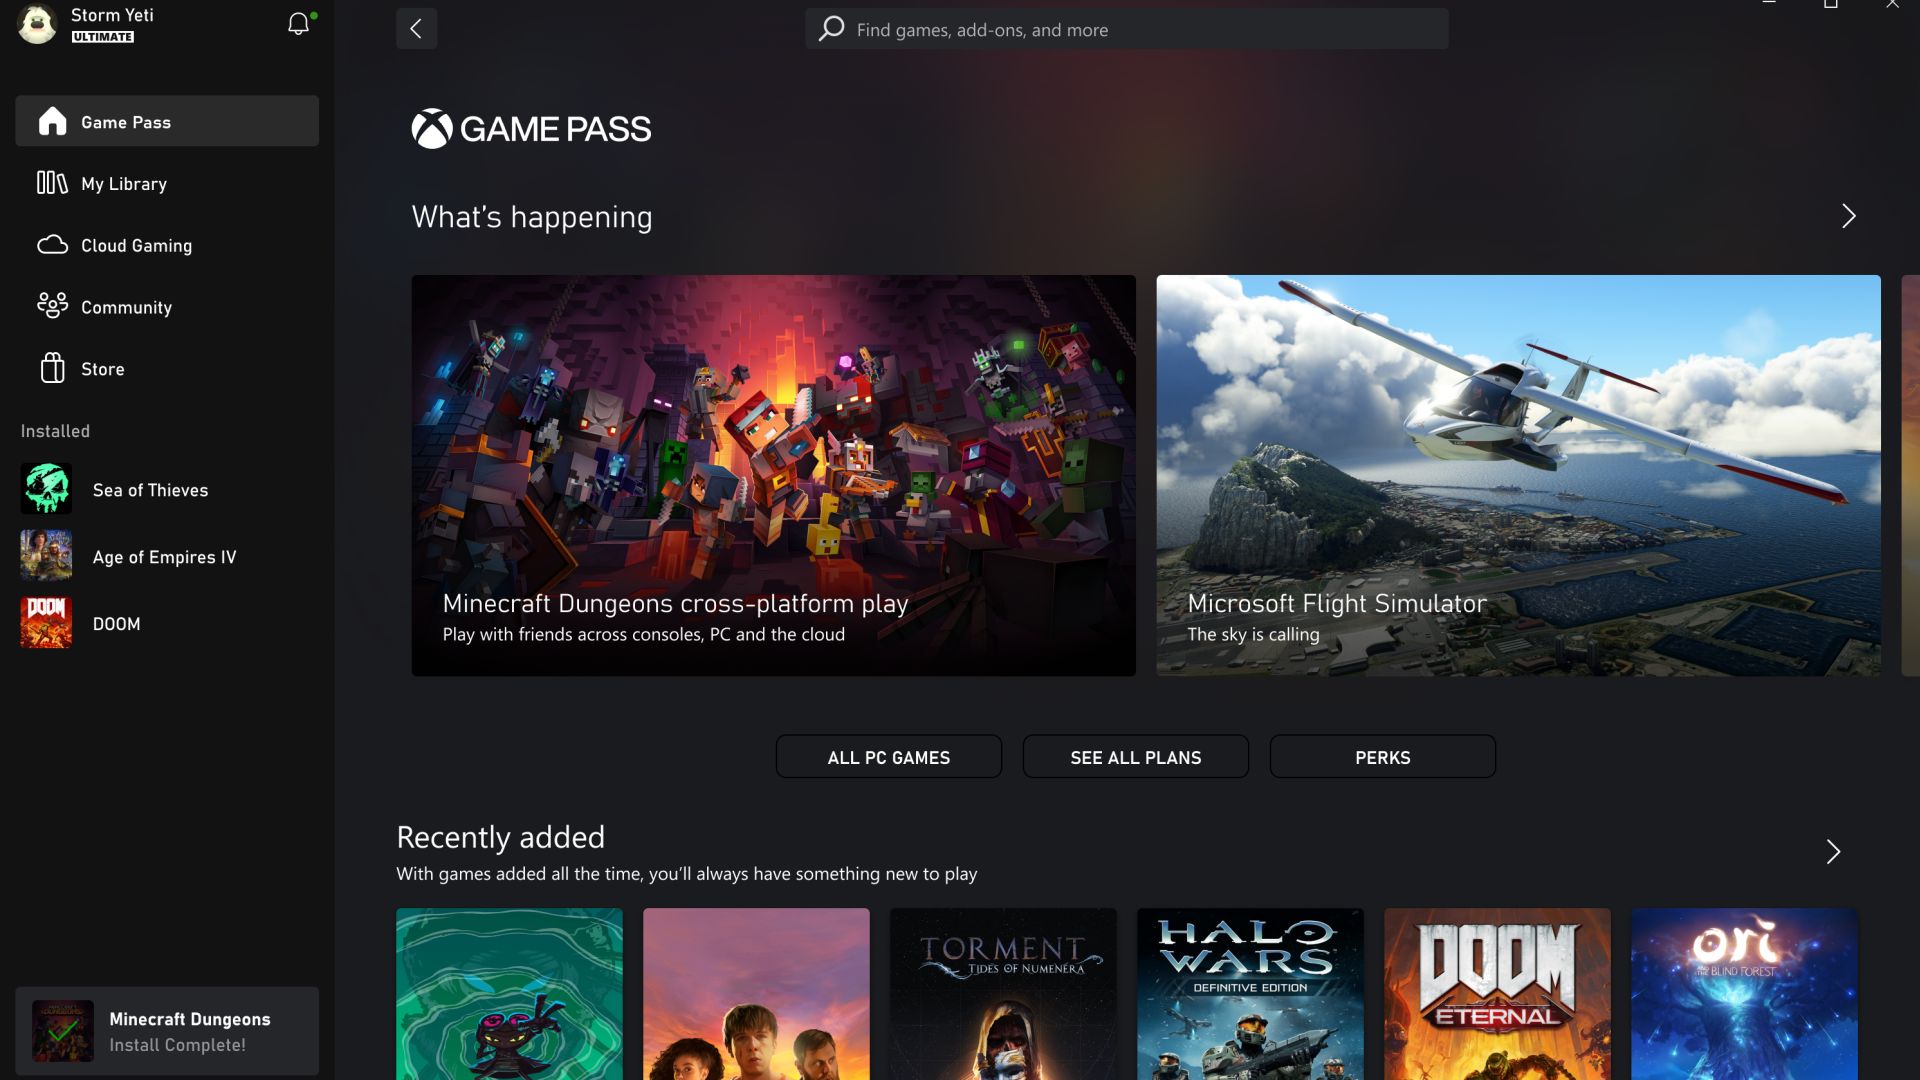 Introducing Xbox Game Pass Ultimate Coming Later this Year - Xbox Wire